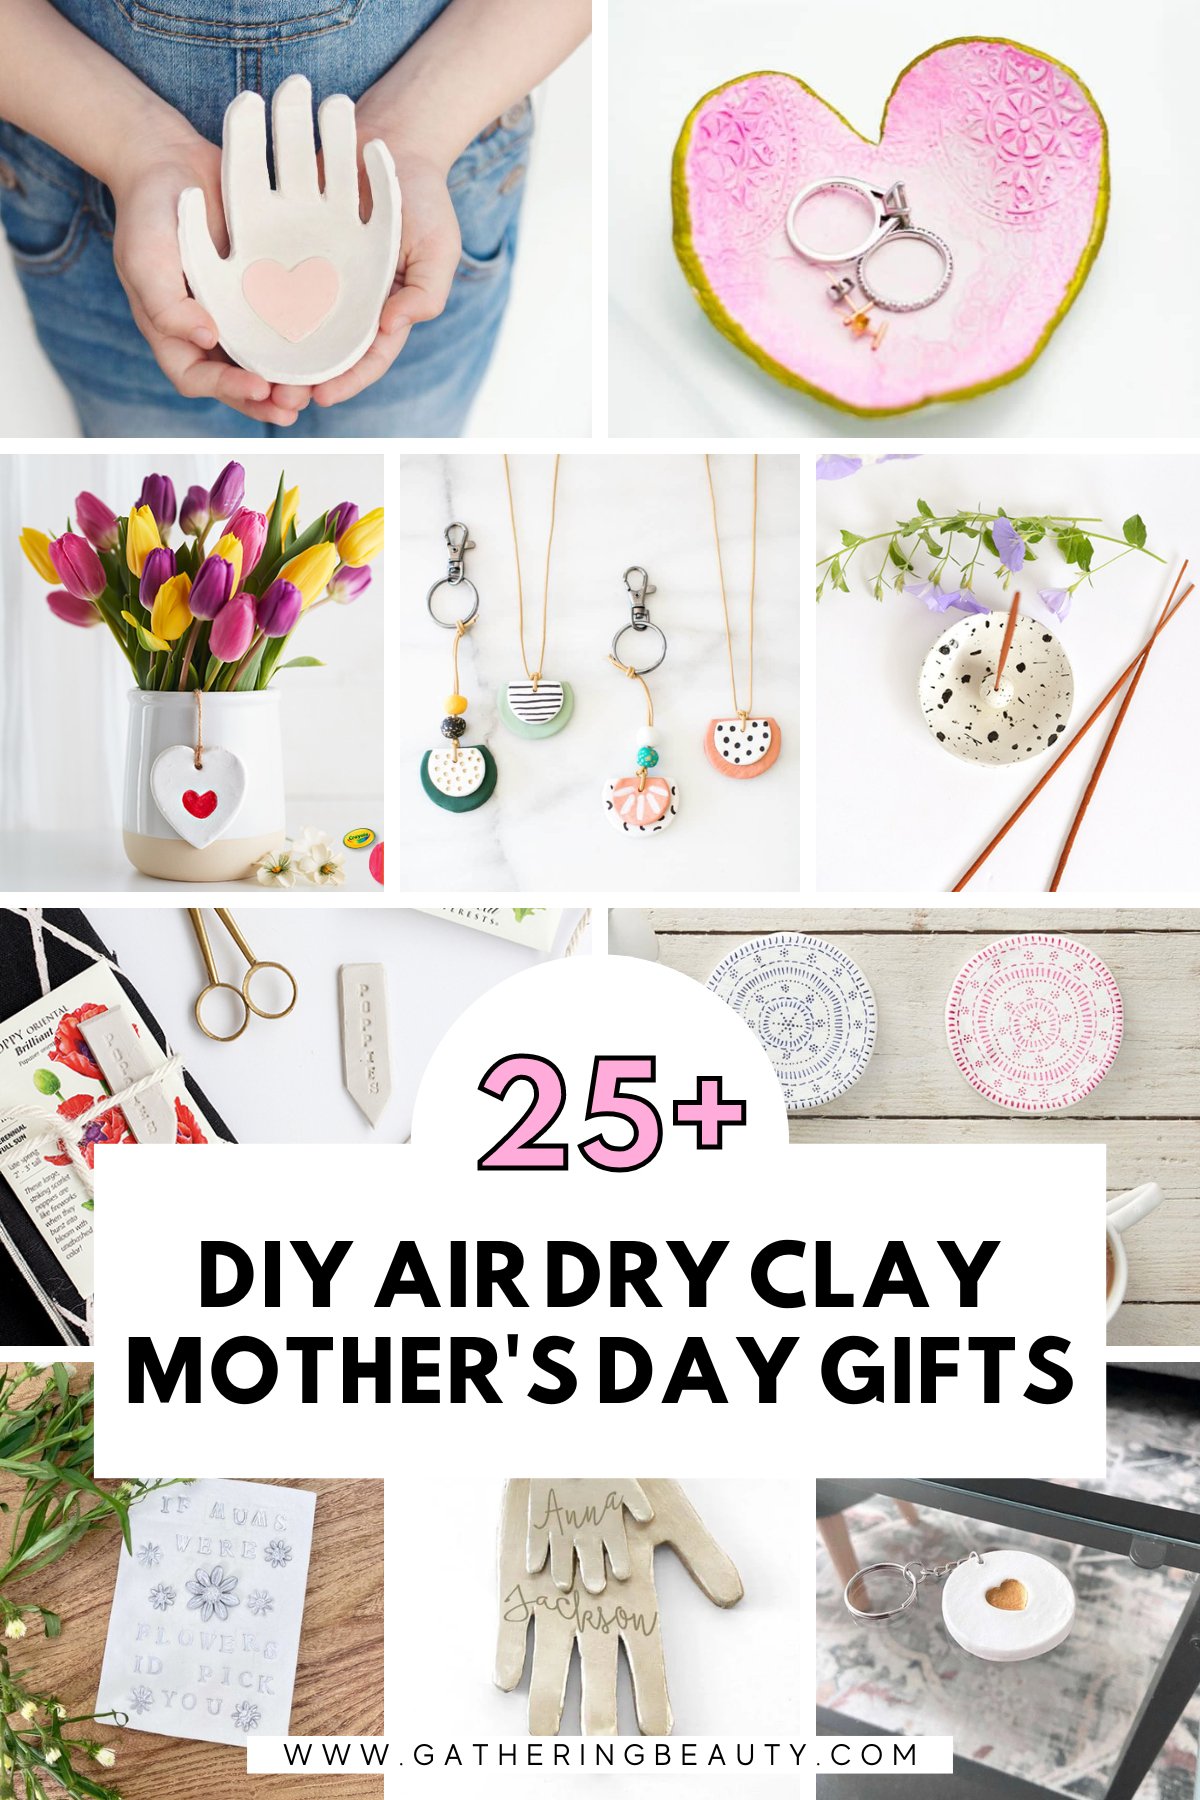 Air Dry Clay Crafts, Crafts